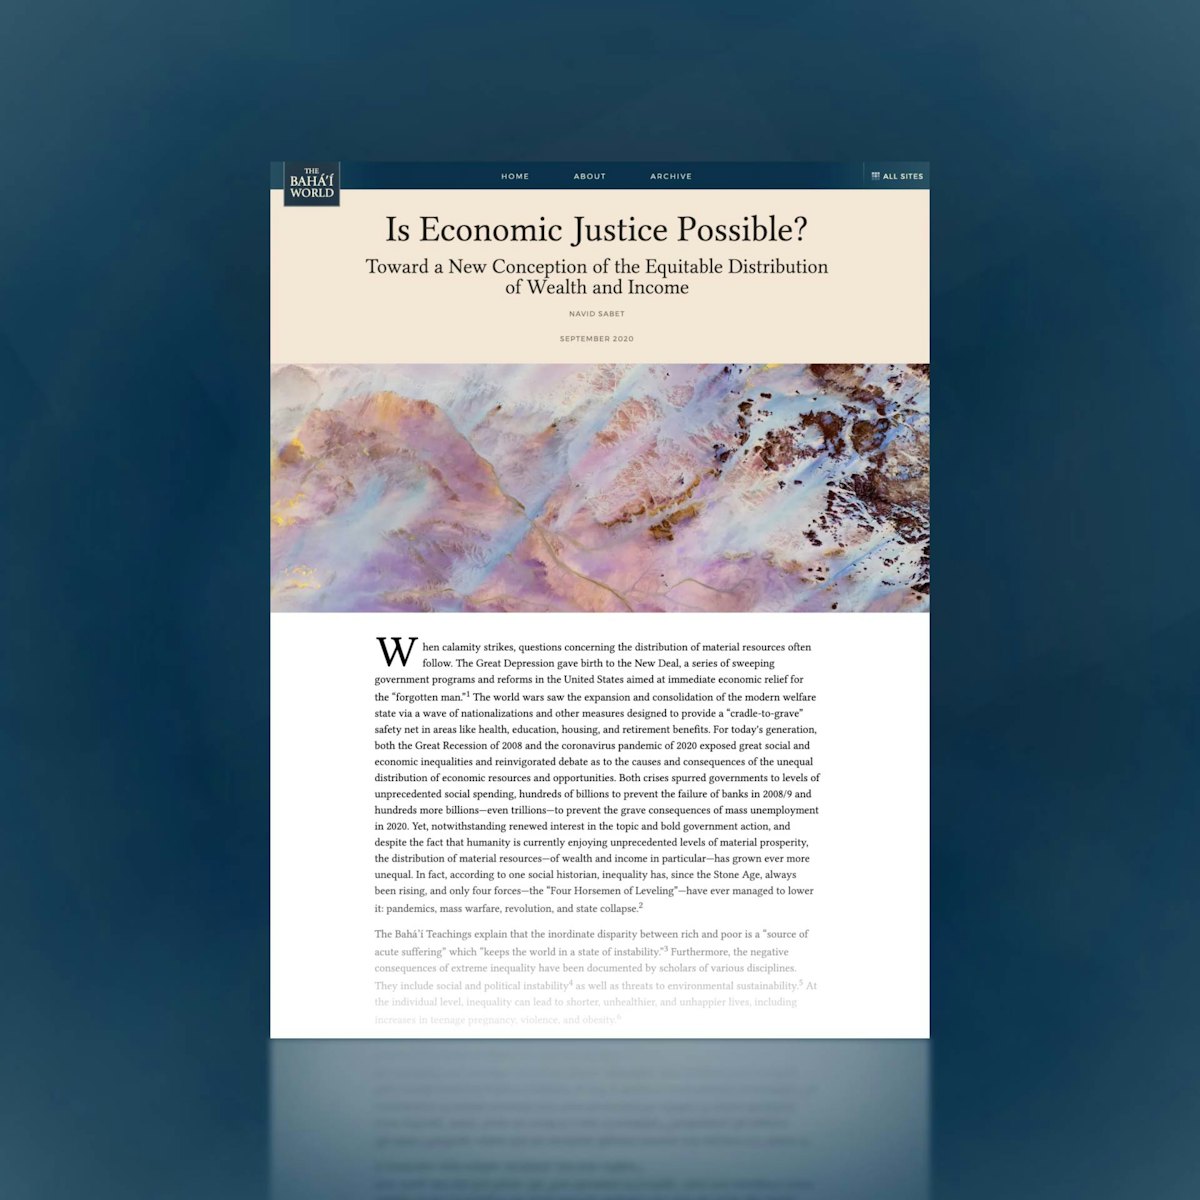 The growing disparities around the globe between the wealthiest and poorest members of society is the subject of the article “Is Economic Justice Possible?”